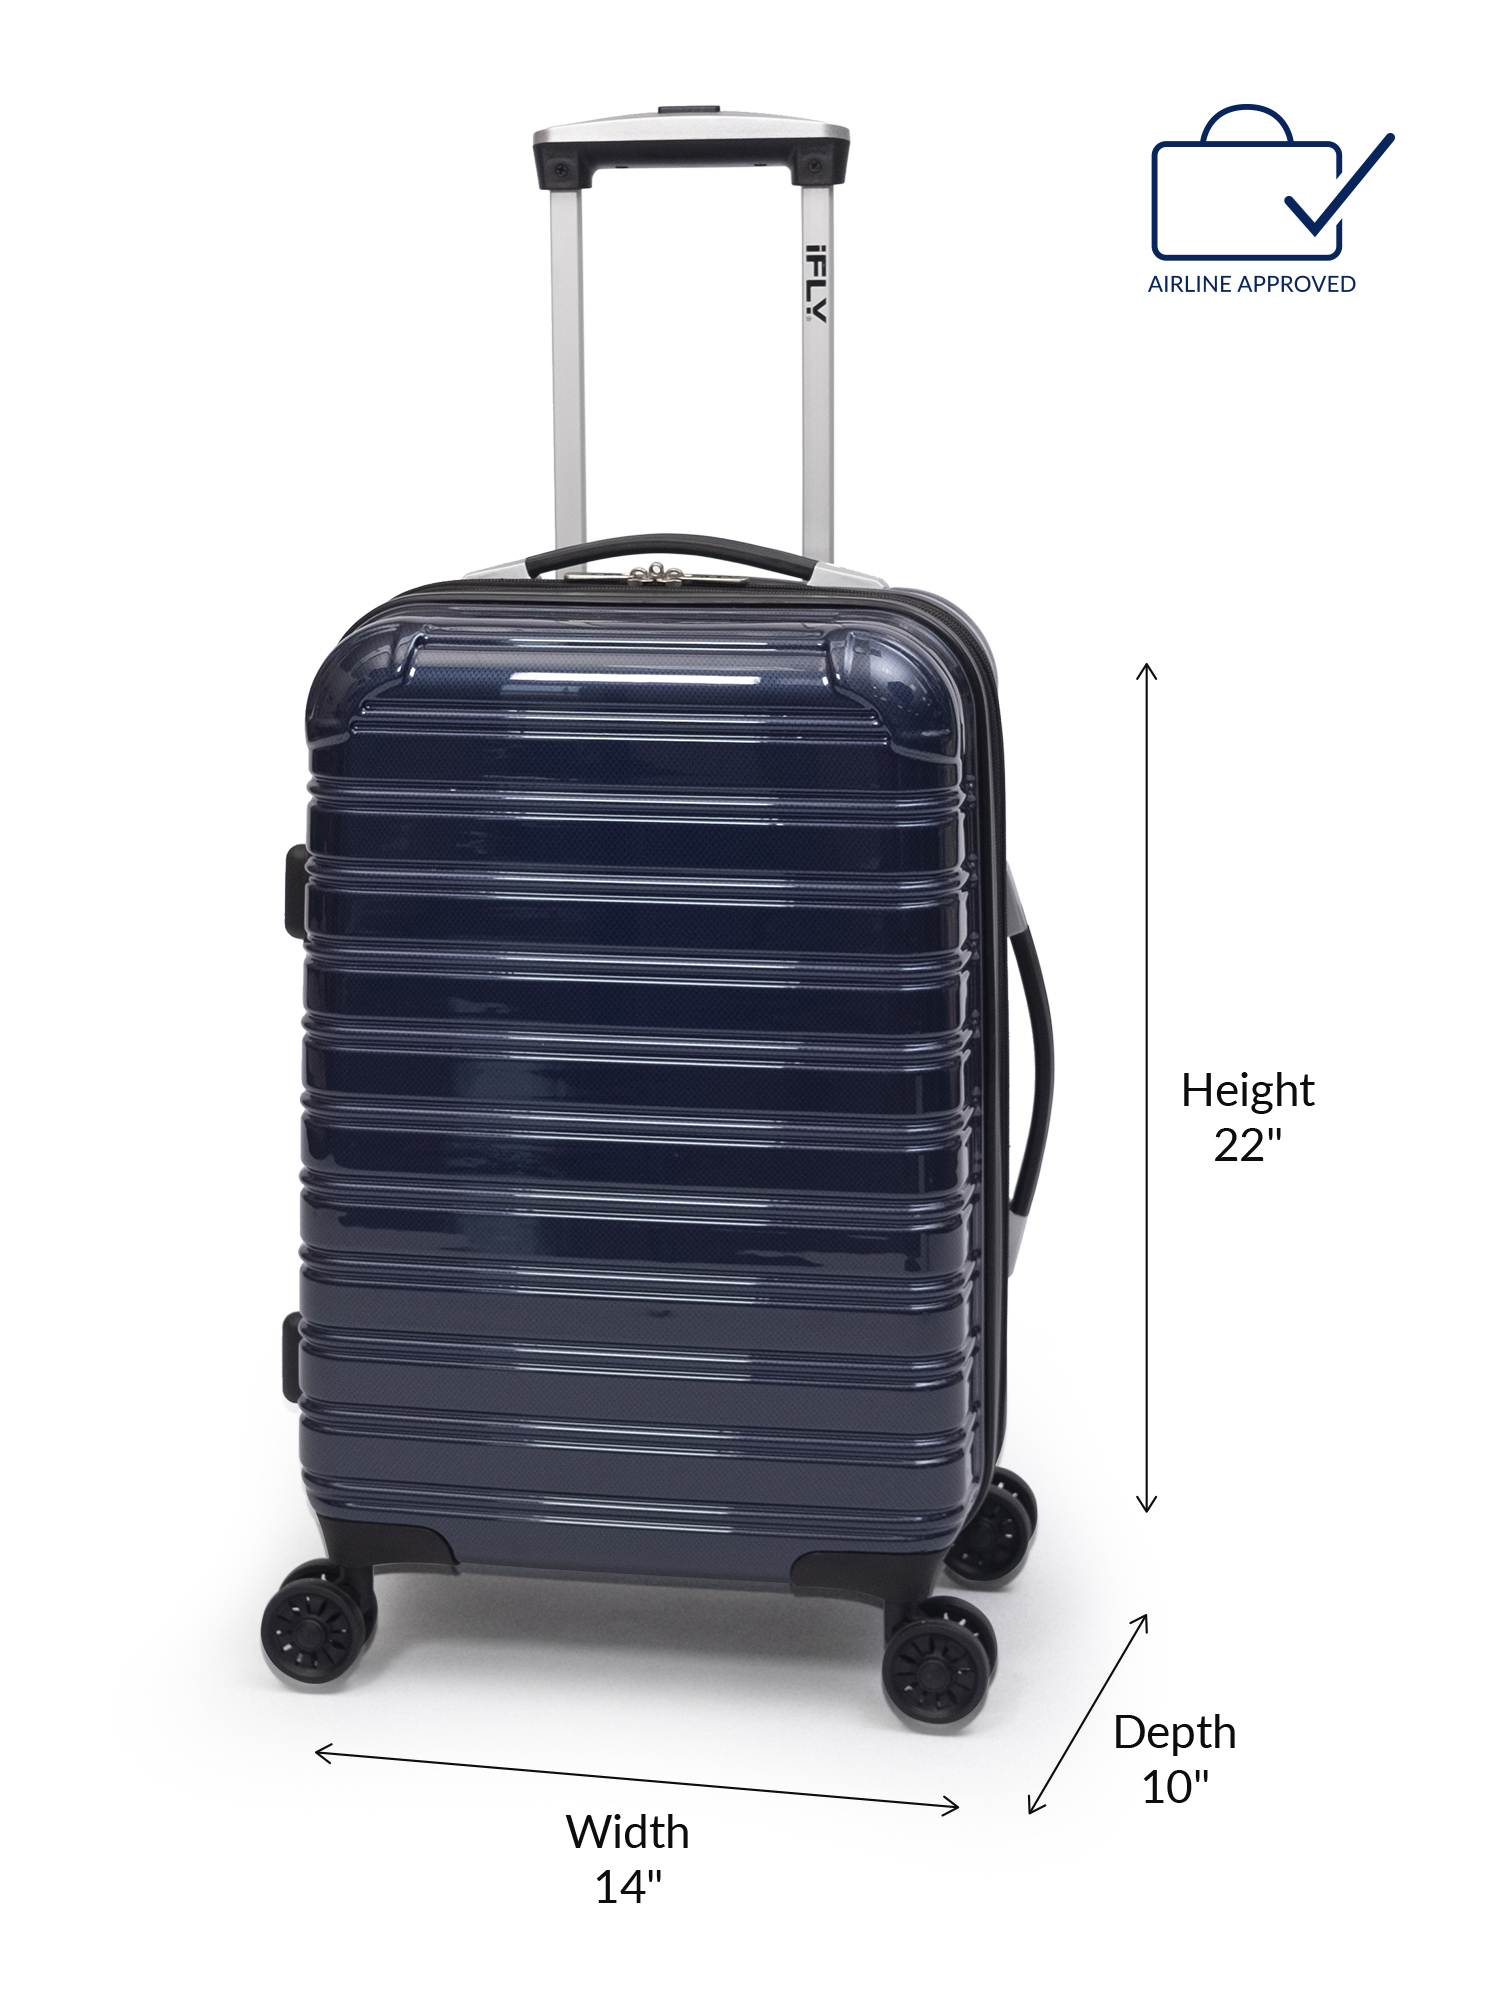 iFLY Online Exclusive Hard Sided Luggage Fibertech 20" & Travel Case - image 6 of 9